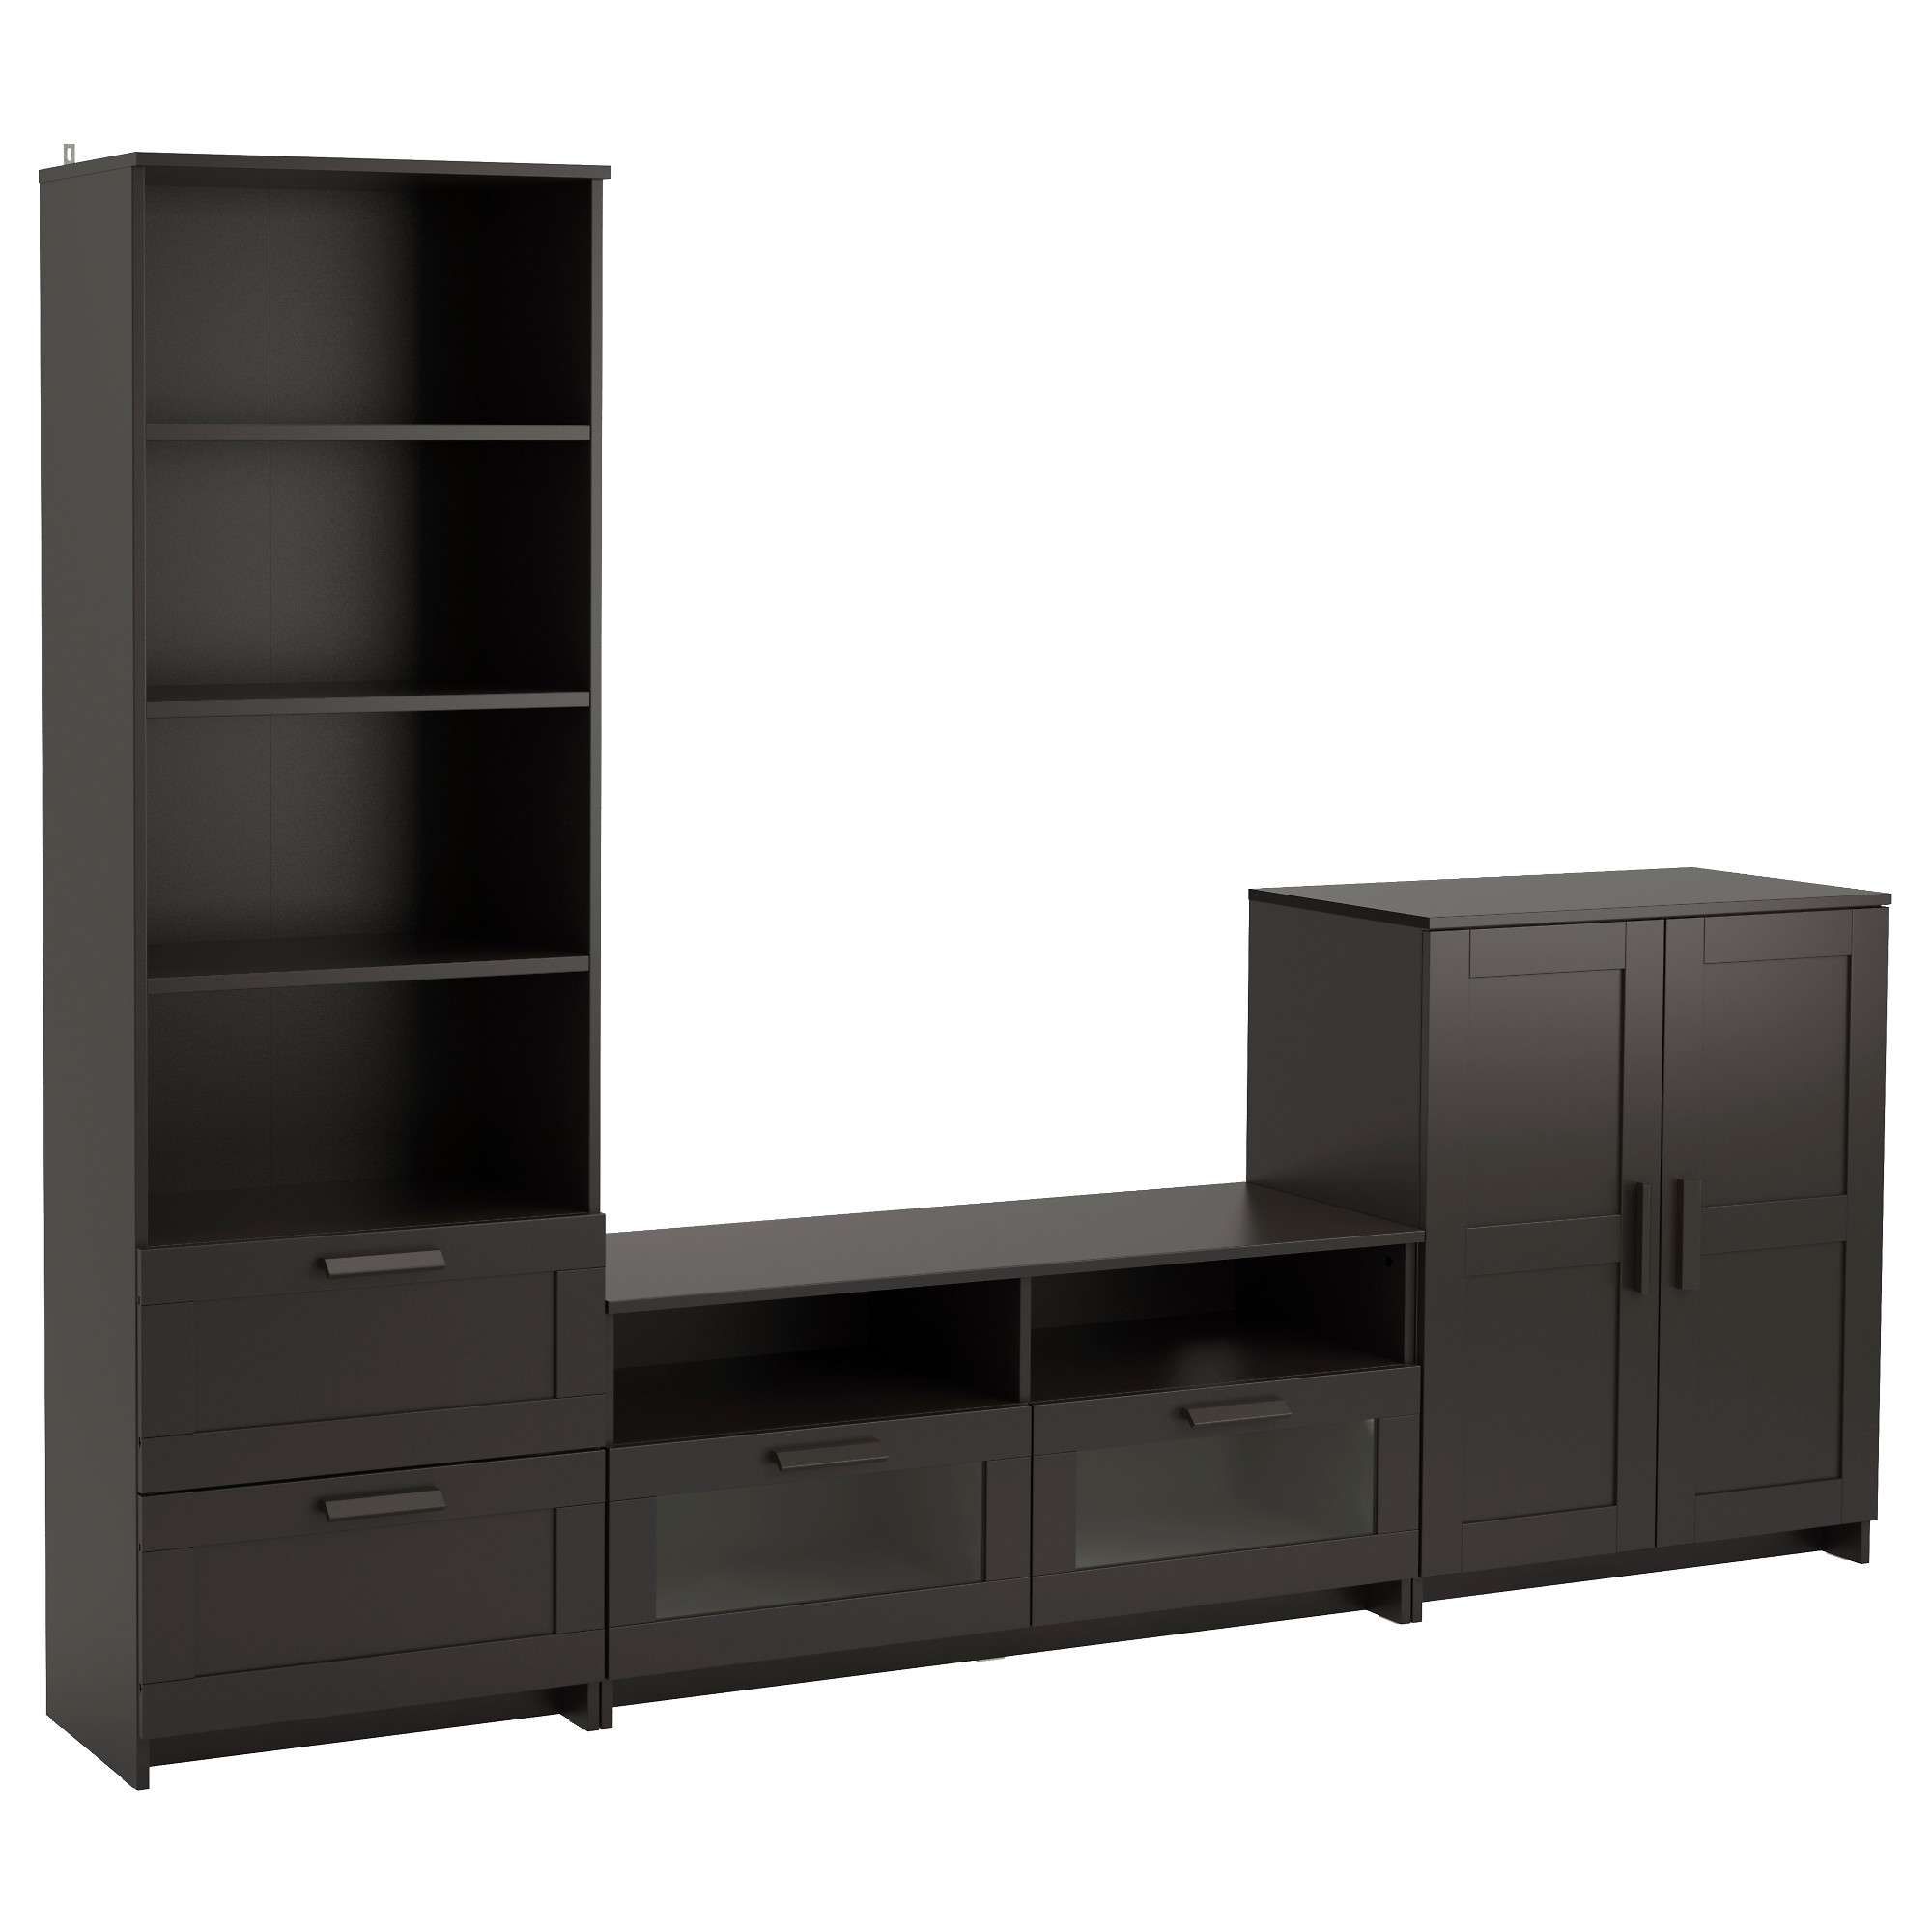 Brimnes Tv Storage Combination – Black – Ikea With Tv Cabinets (View 8 of 20)